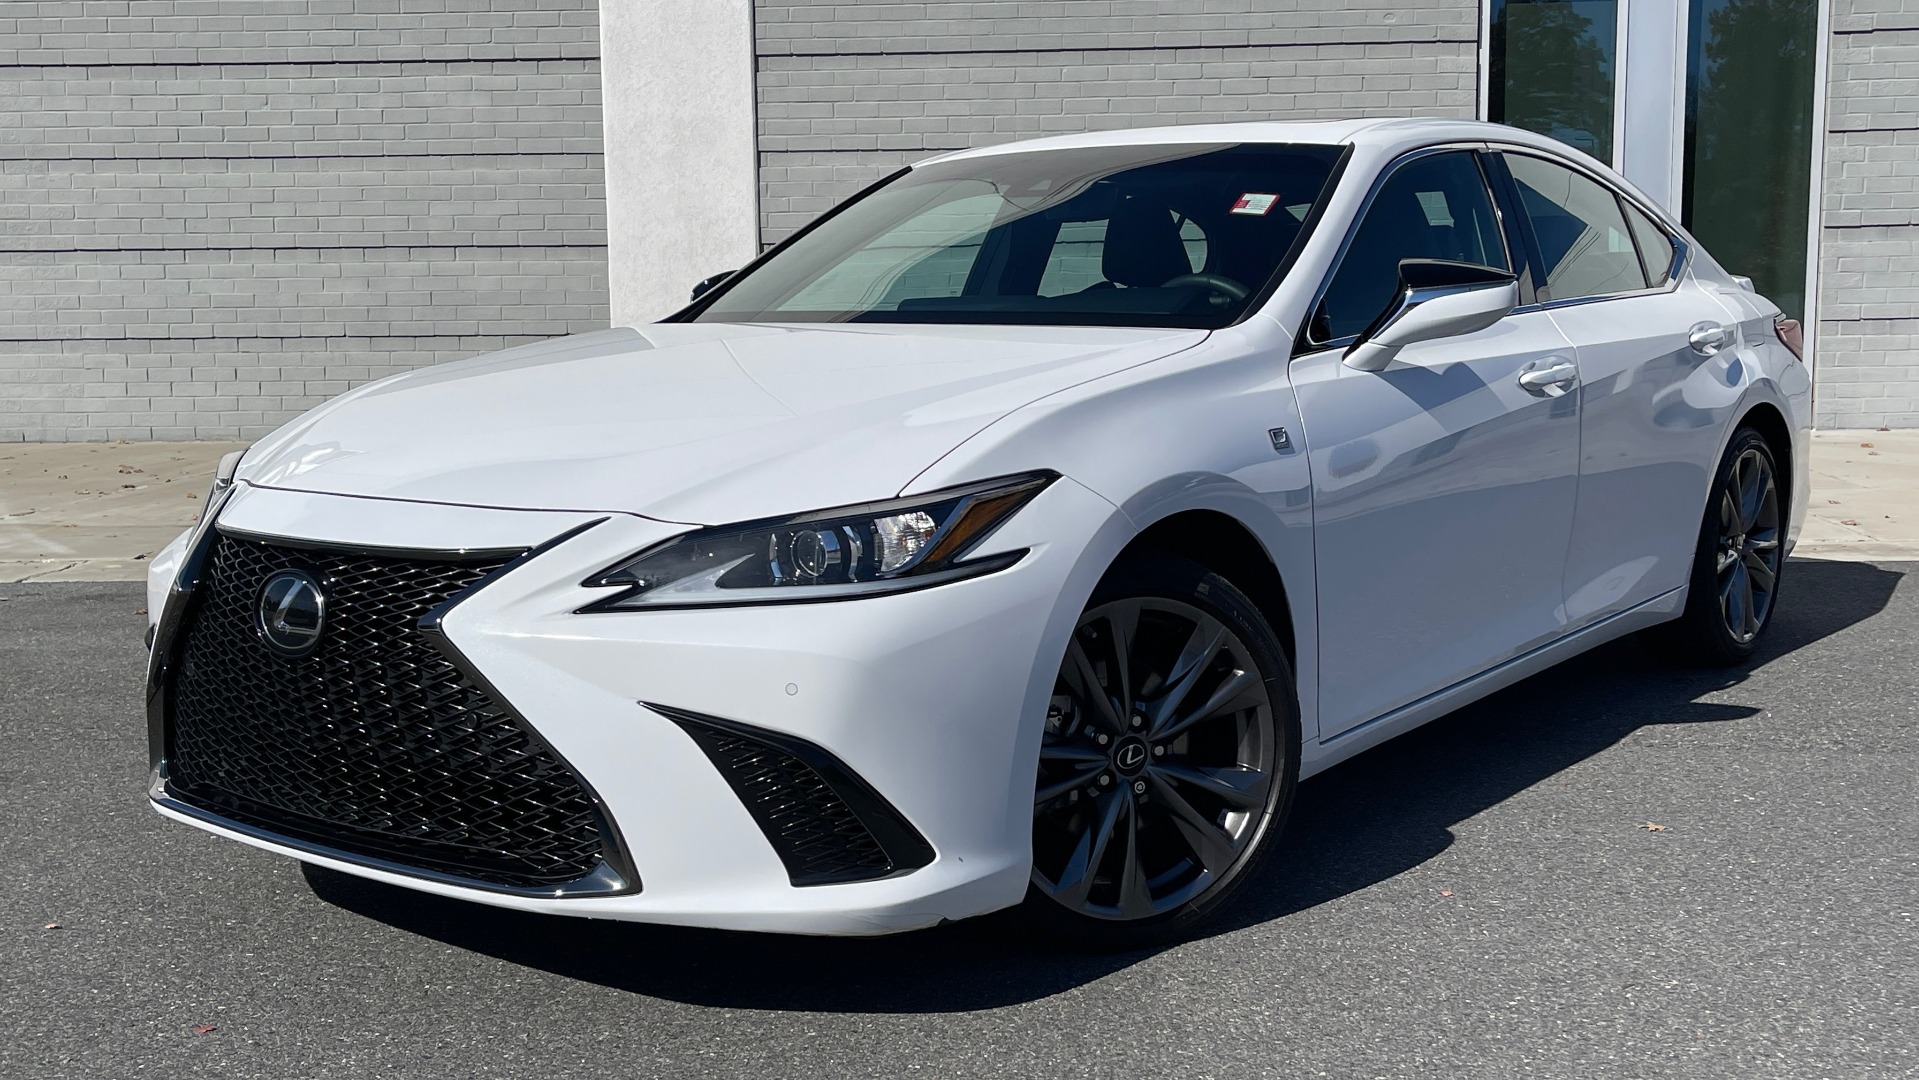 Used 2019 Lexus ES 350 F-SPORT 3.5L SEDAN / 8-SPD / NAV / SUNROOF / REARVIEW for sale Sold at Formula Imports in Charlotte NC 28227 1